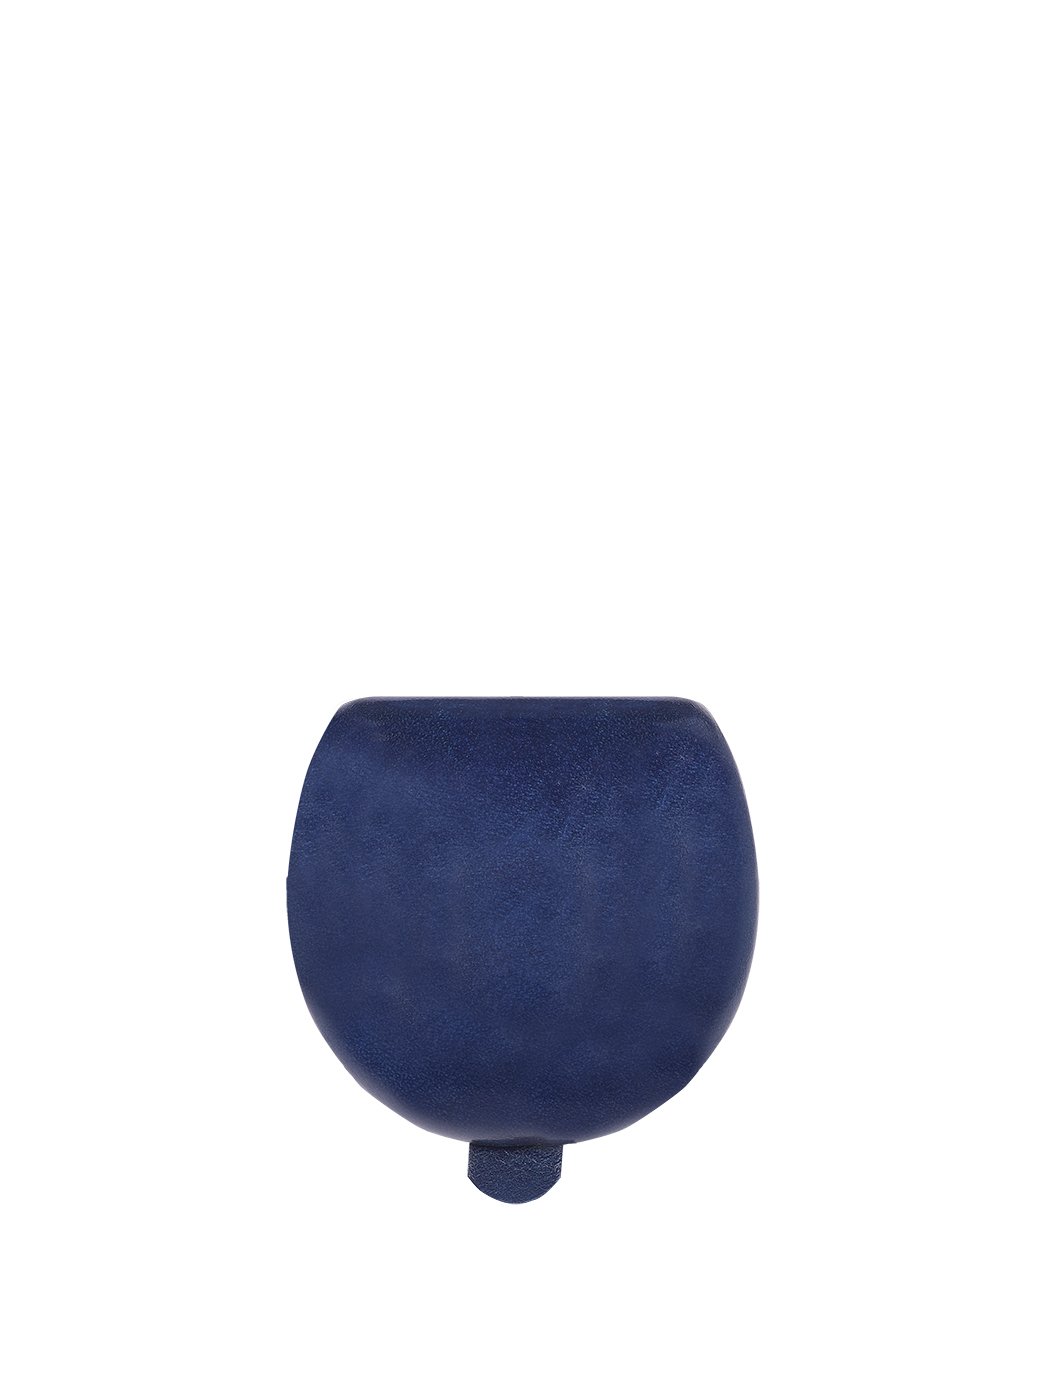 Florentine Tacco Leather Coin Holder Blue